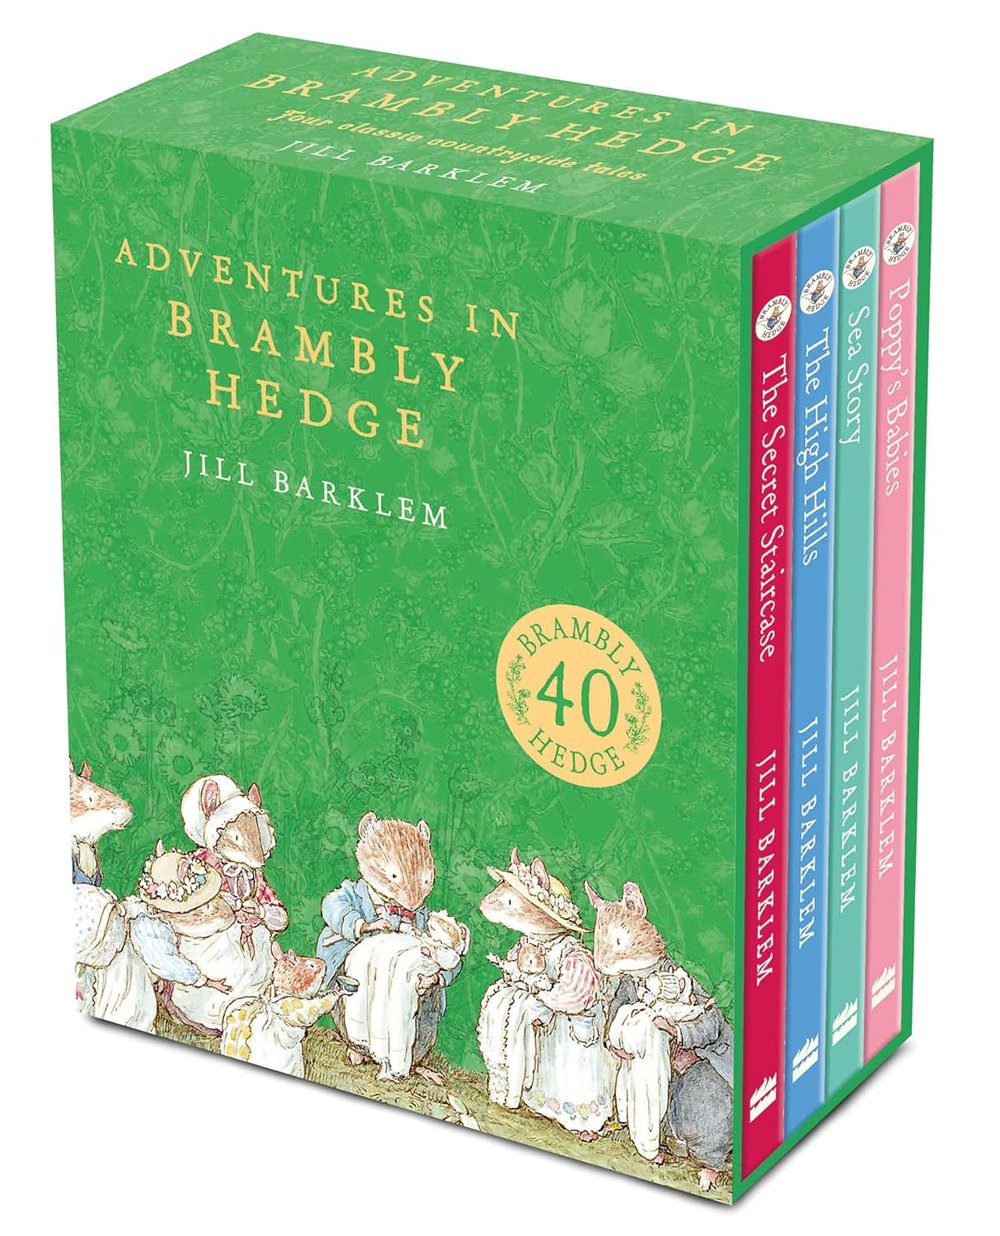 The Brambly Hedge series